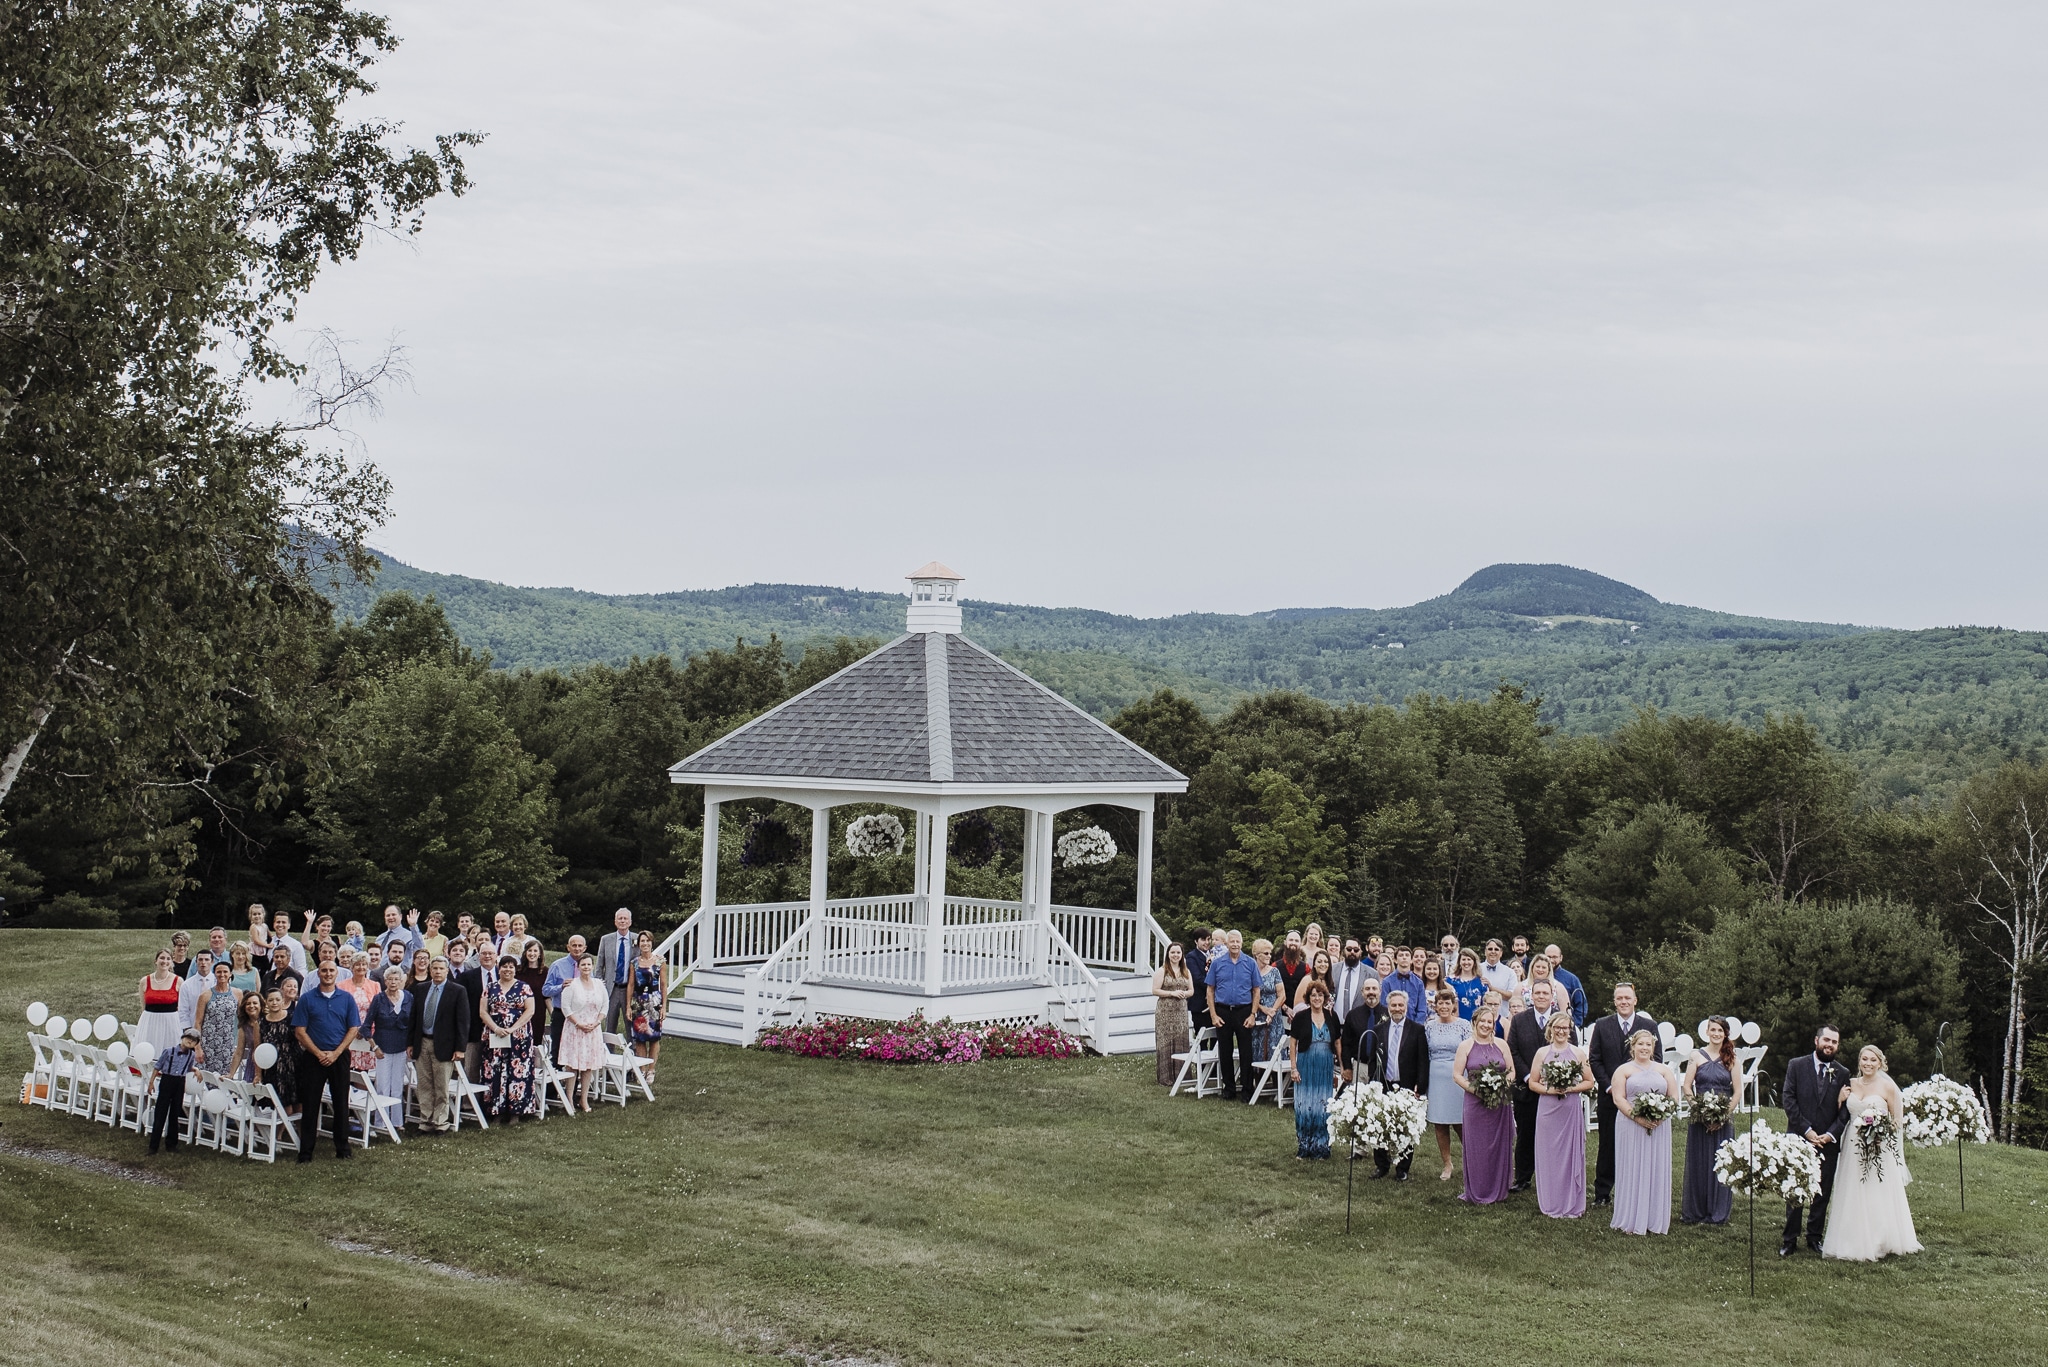 Wedding and all guests at lucerne inn next to gazebo